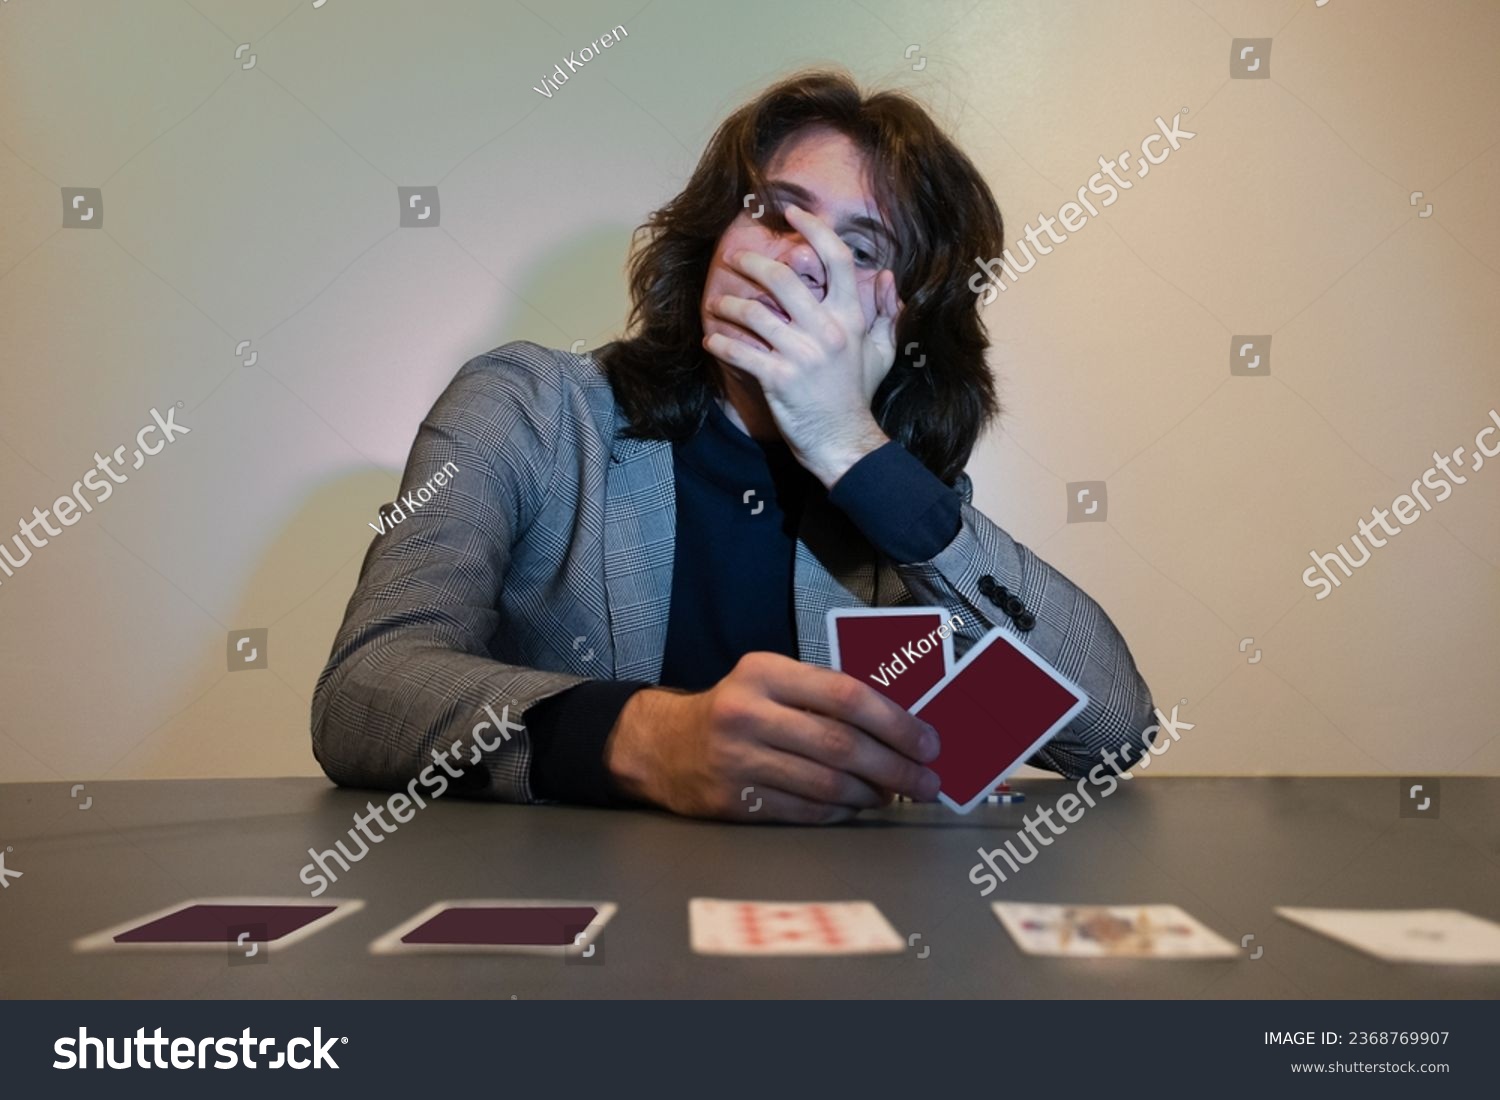 Man in a suit playing poker - card game and holding his mouth while holding his playing cards. Surprised, sad, gambling addiction concept. #2368769907